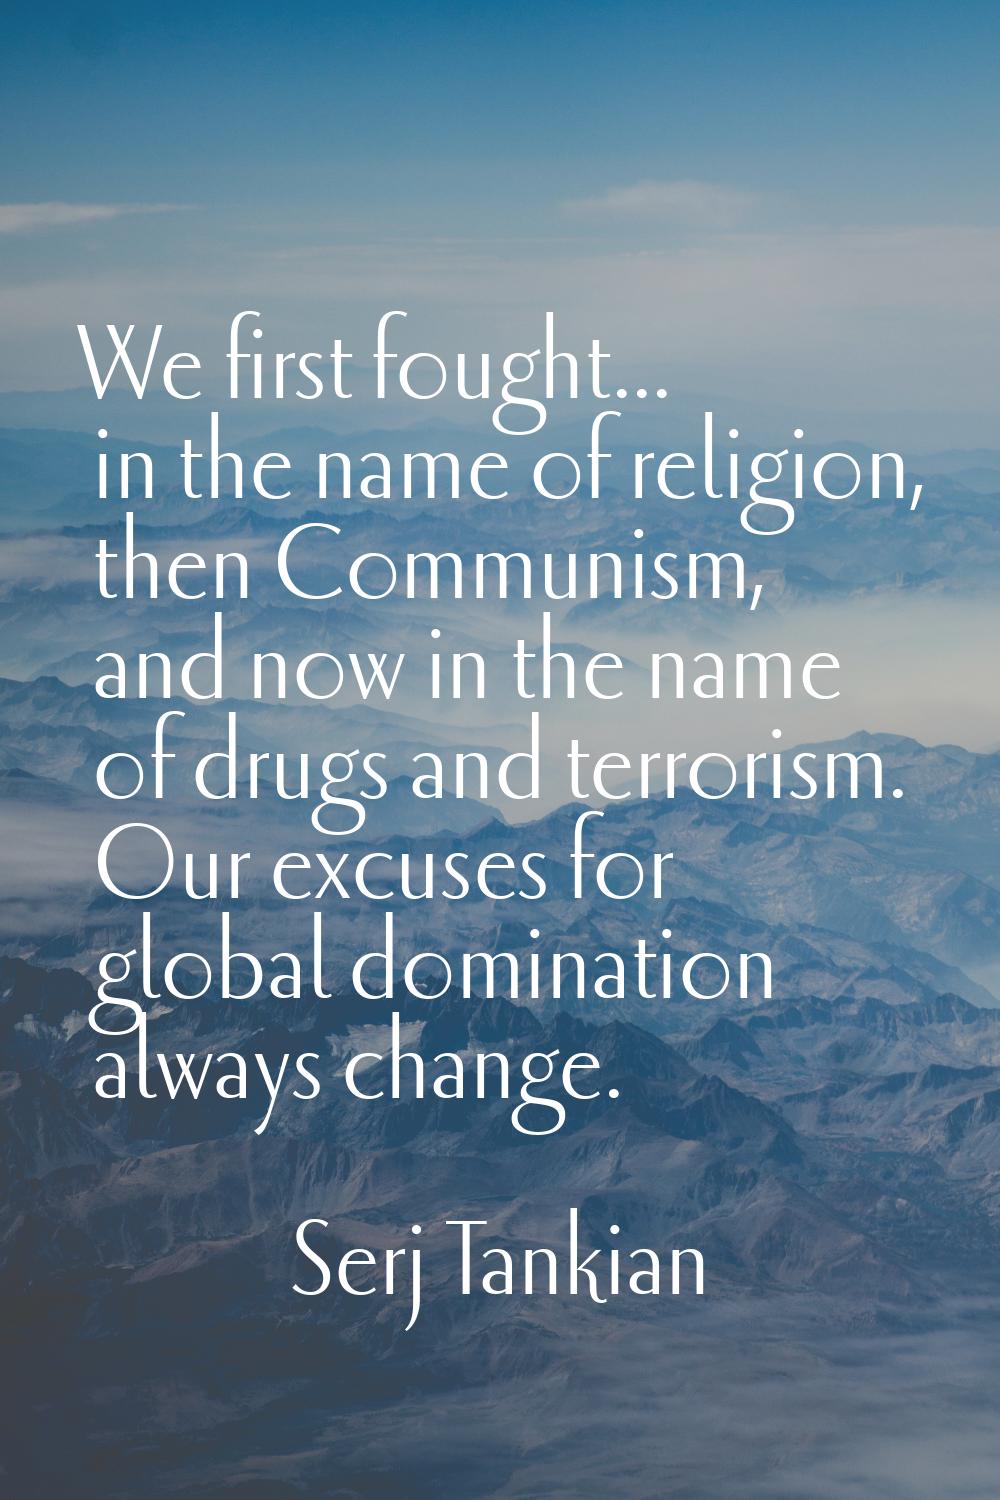 We first fought... in the name of religion, then Communism, and now in the name of drugs and terror